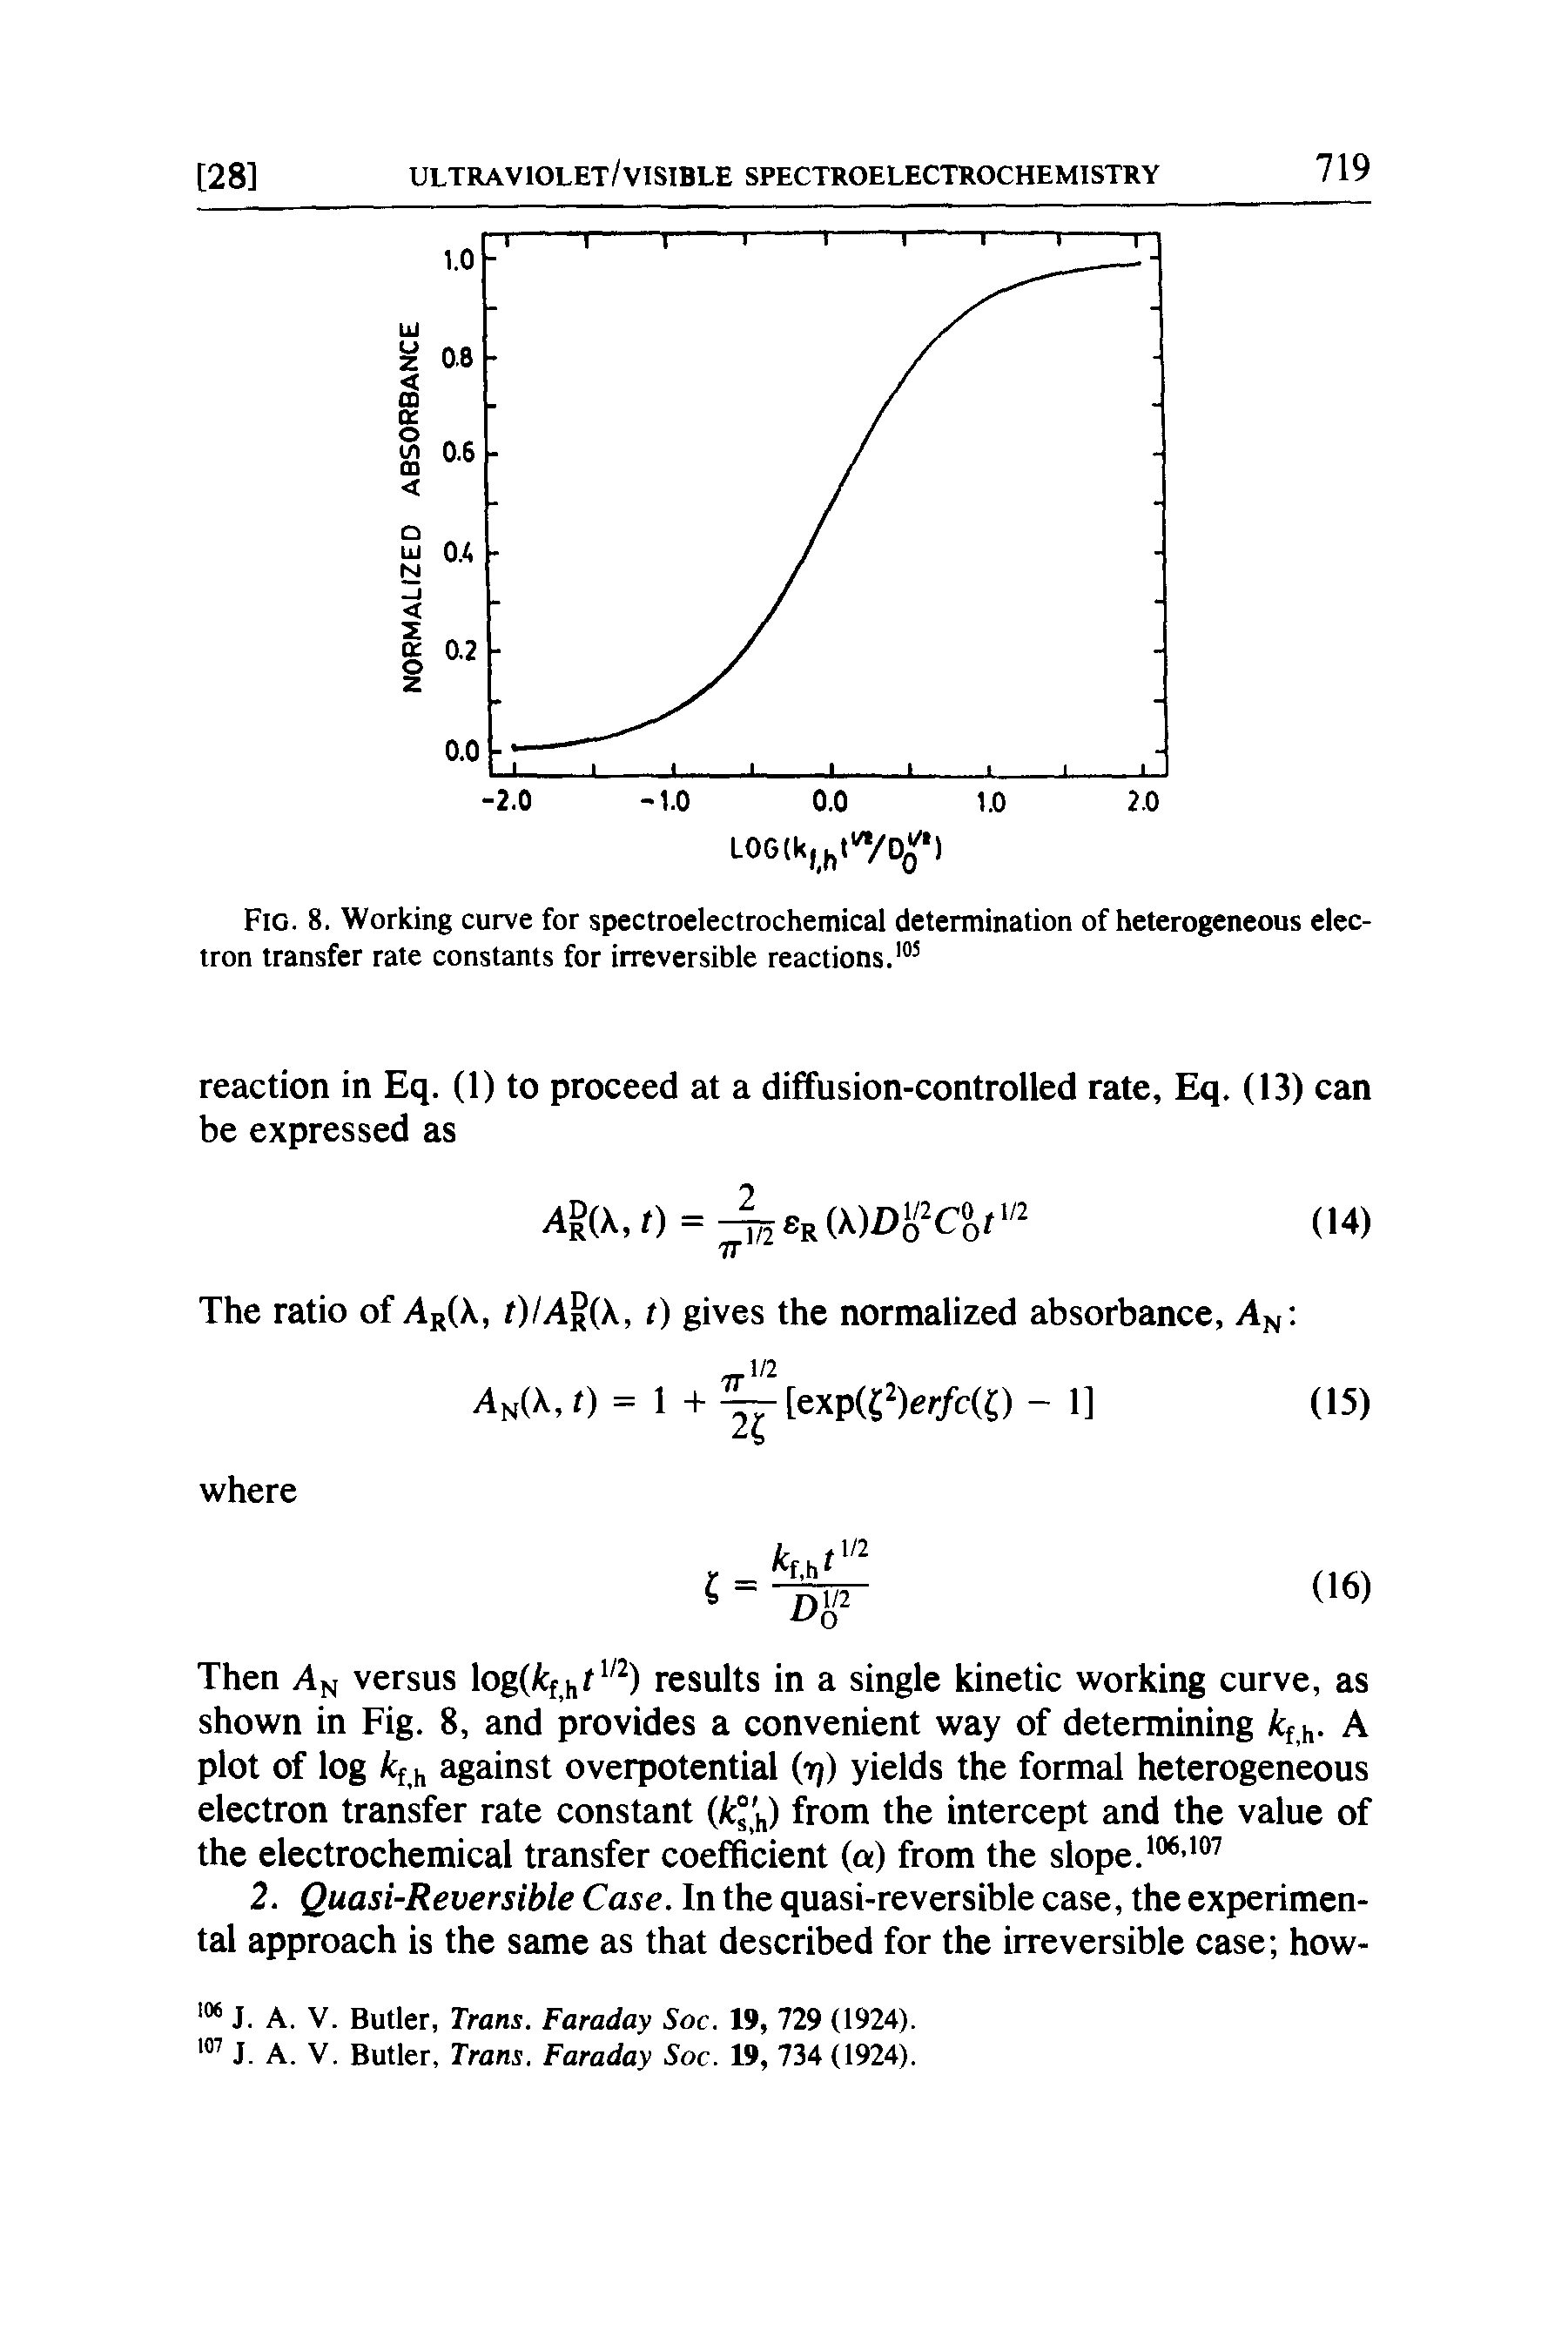 Fig. 8. Working curve for spectroelectrochemical determination of heterogeneous electron transfer rate constants for irreversible reactions.